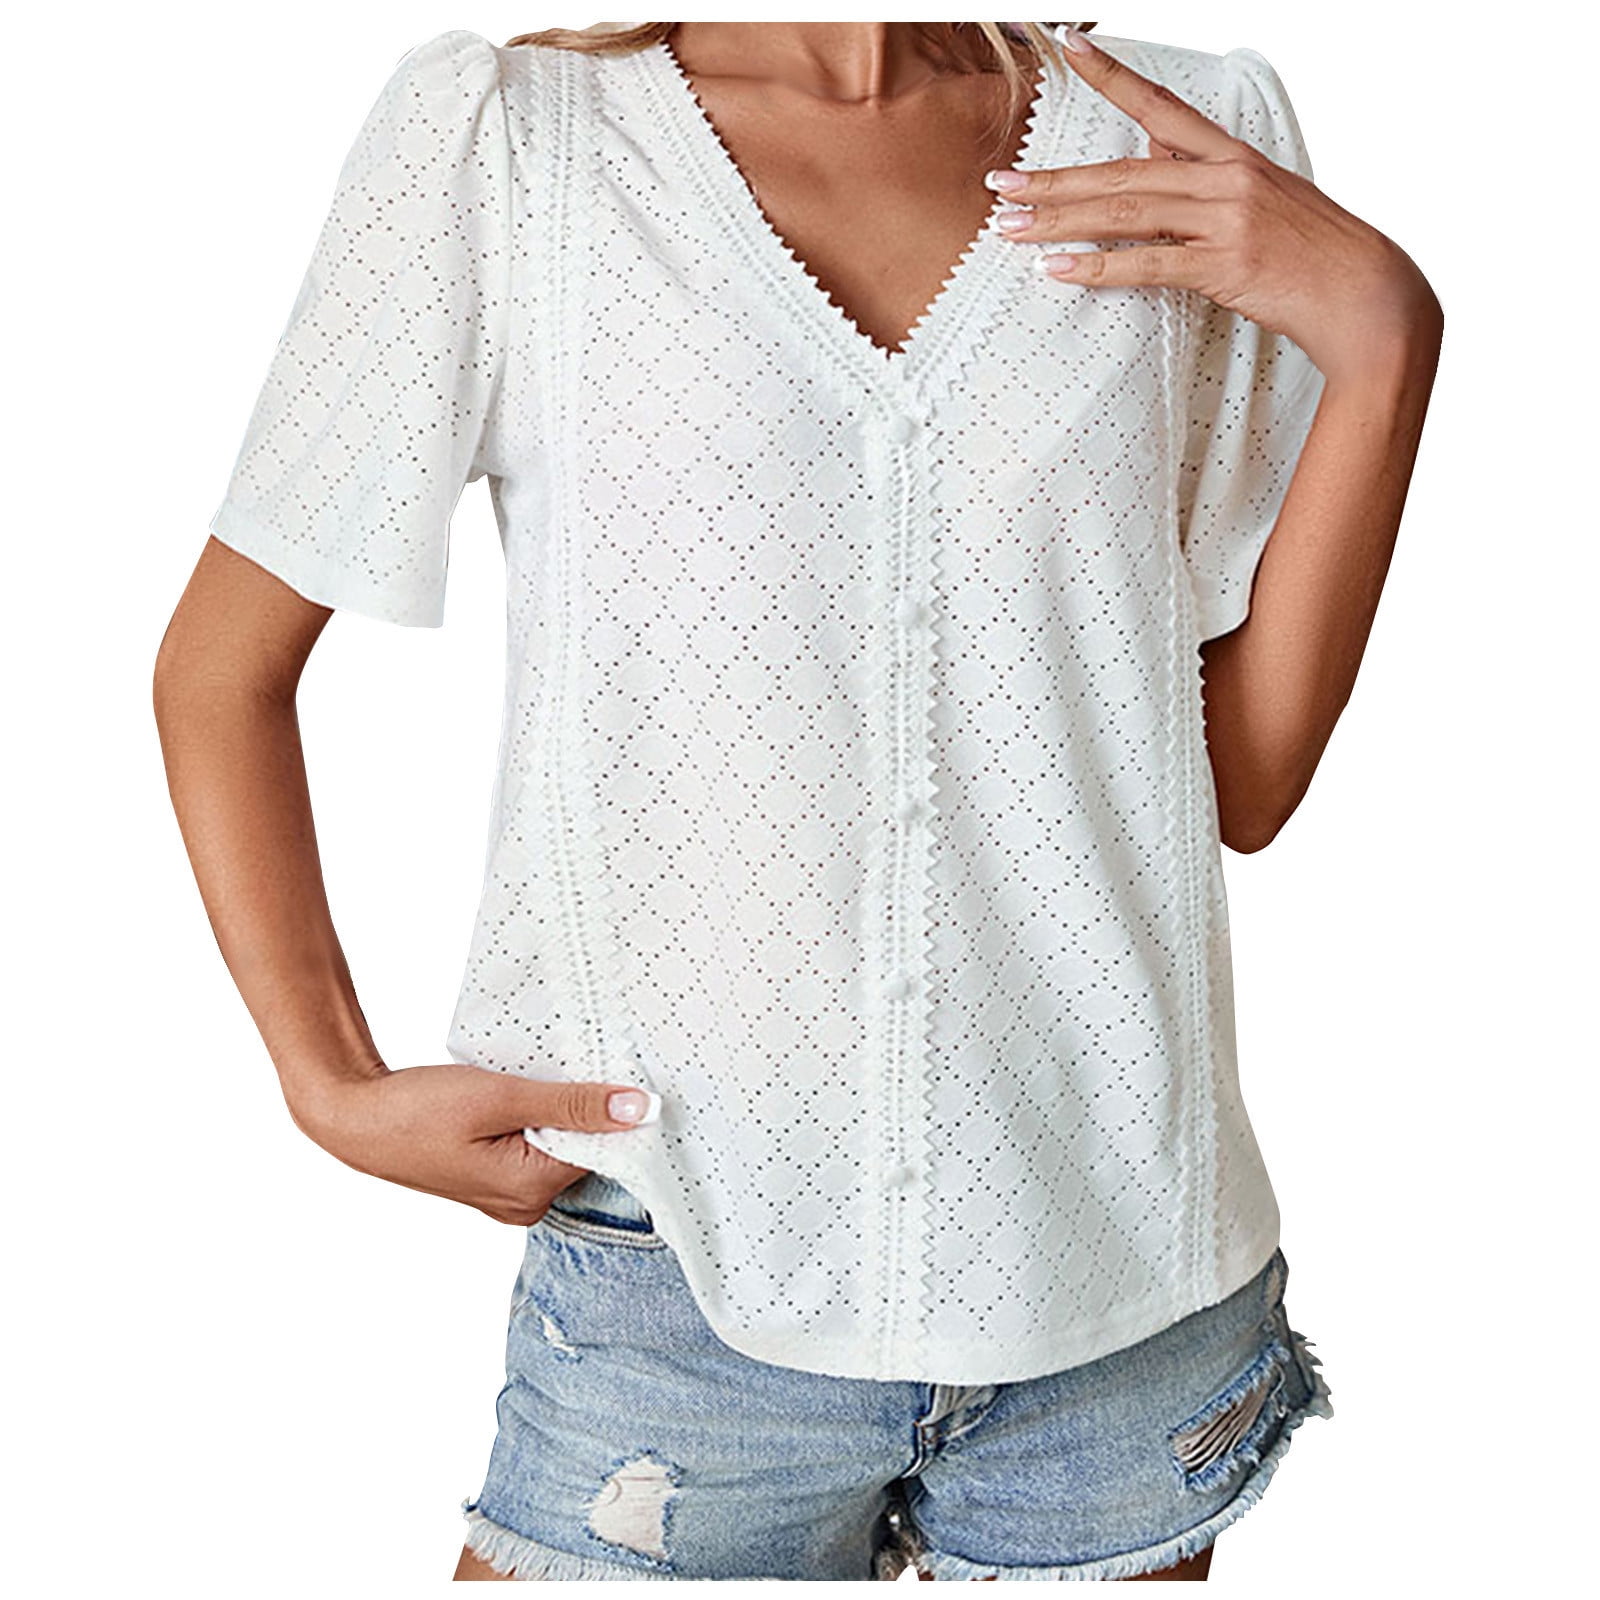 YYDGH Women's V Neck Lace Trim Button Tops Casual Dressy Short Sleeve  Eyelet Shirts Blouse Loose Fit White M